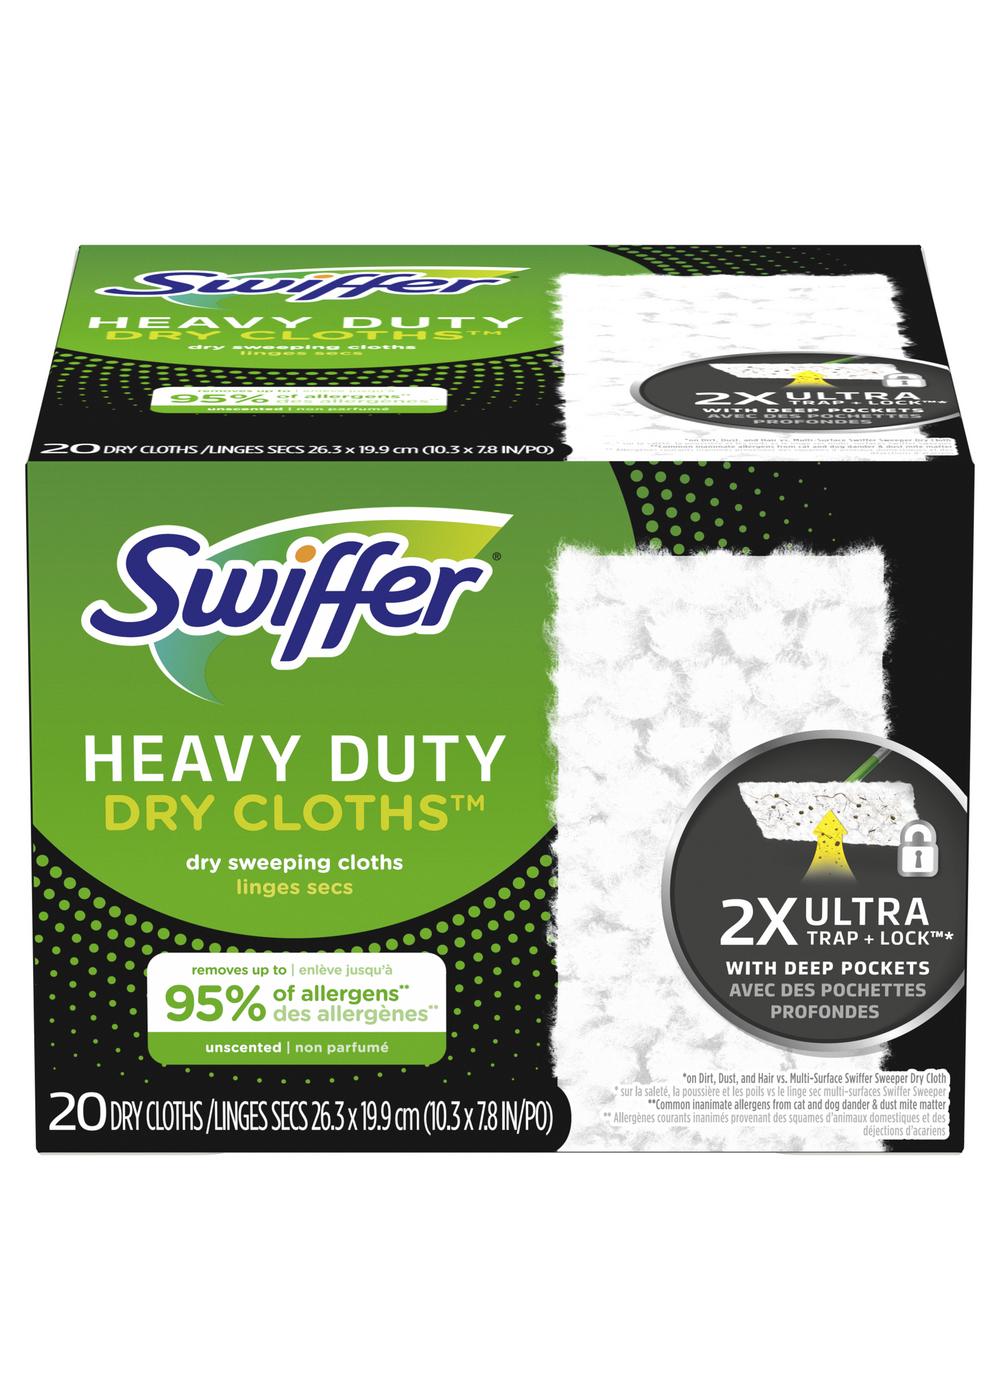 Swiffer Heavy Duty Dry Sweeping Cloth Refills; image 1 of 4